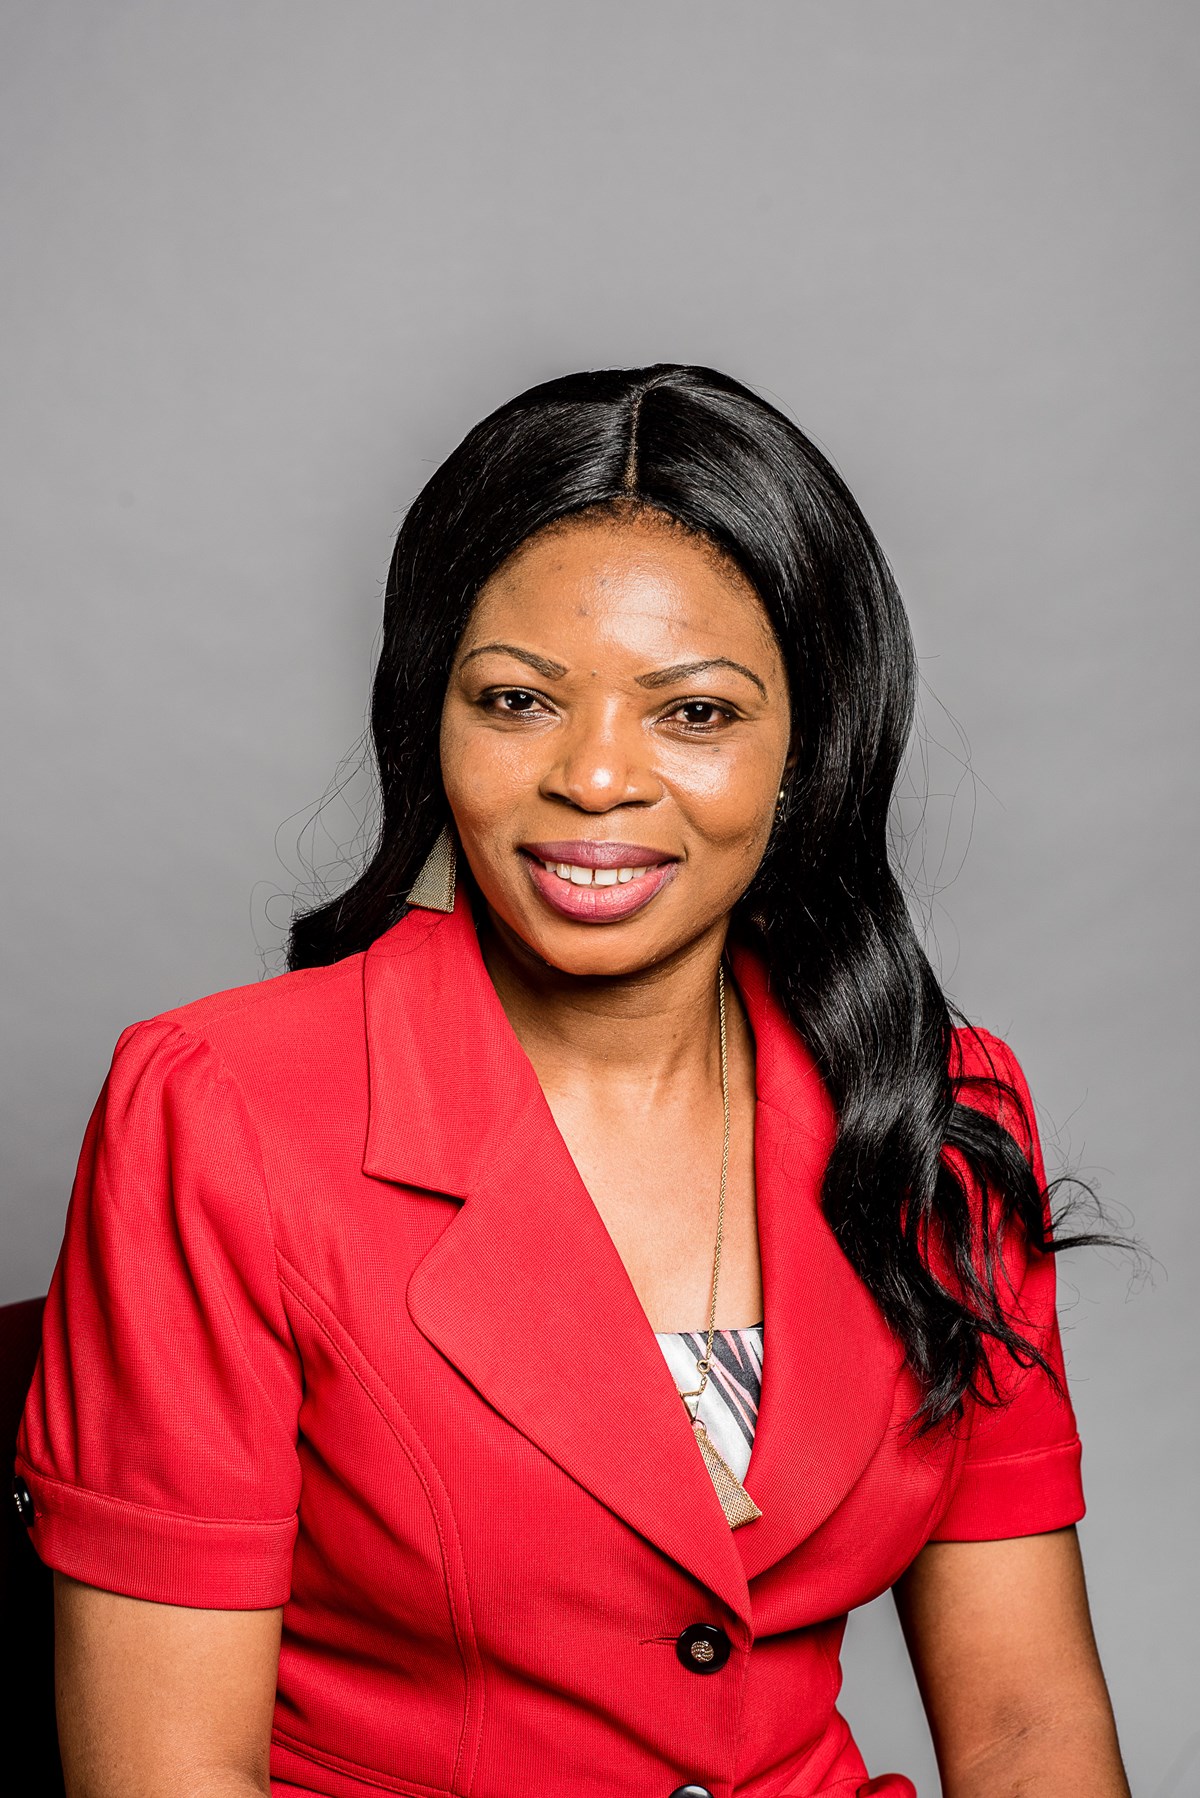 Cllr Michelline Ngongo, Executive Member for Children, Young People and Families